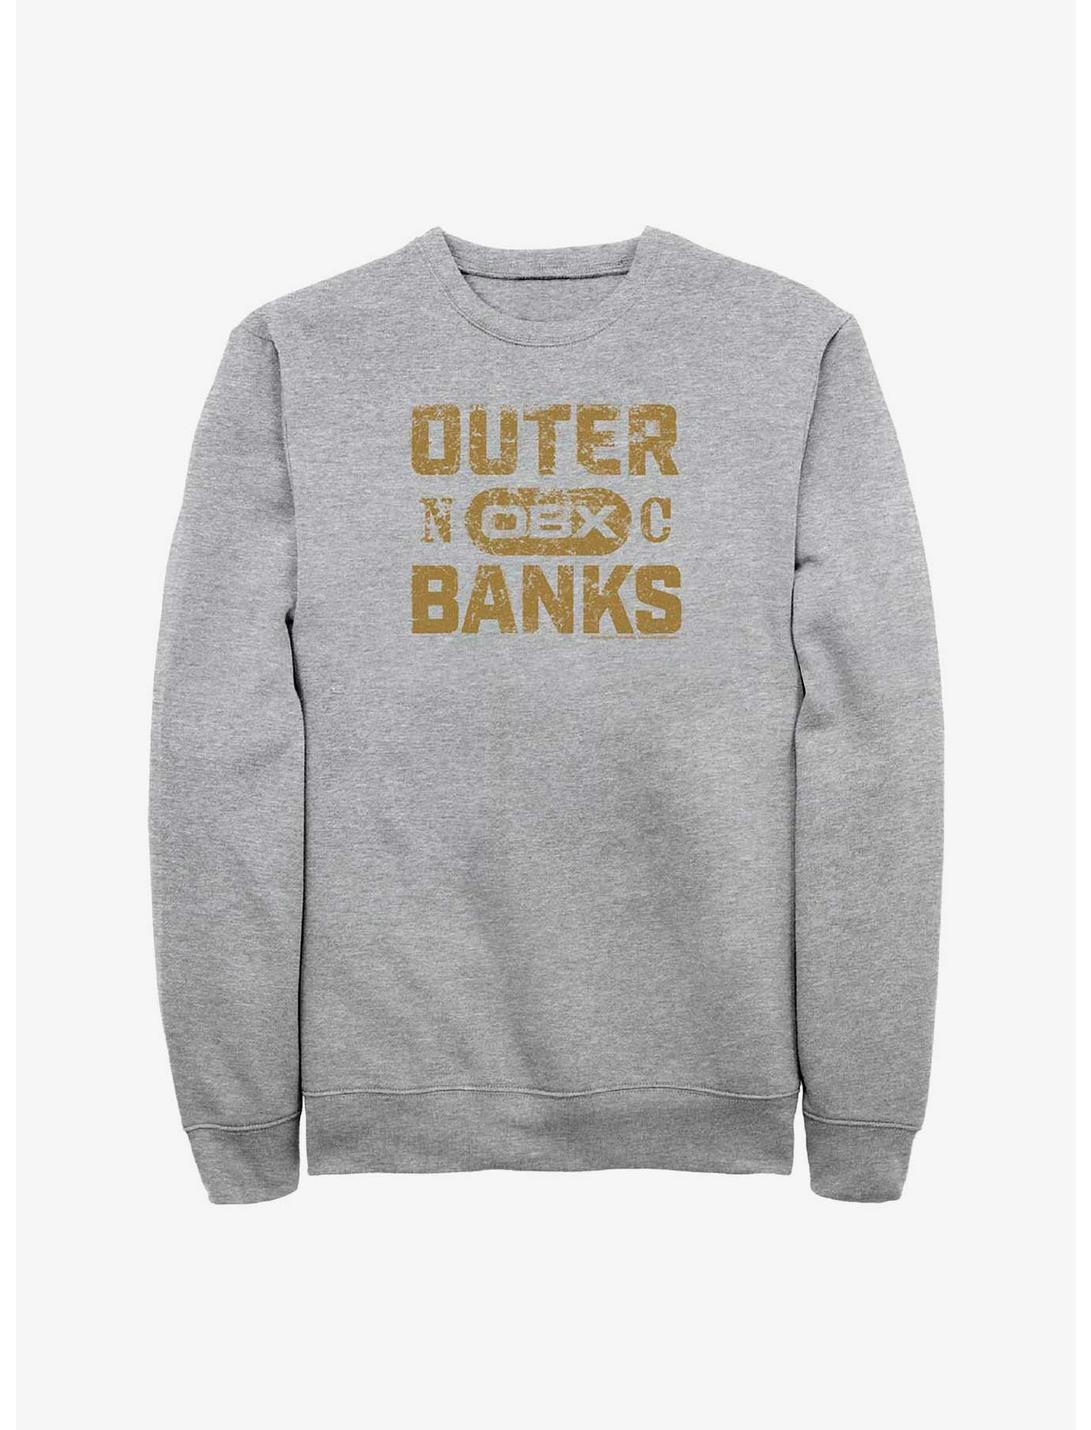 Outer Banks Distressed Type Sweatshirt, ATH HTR, hi-res